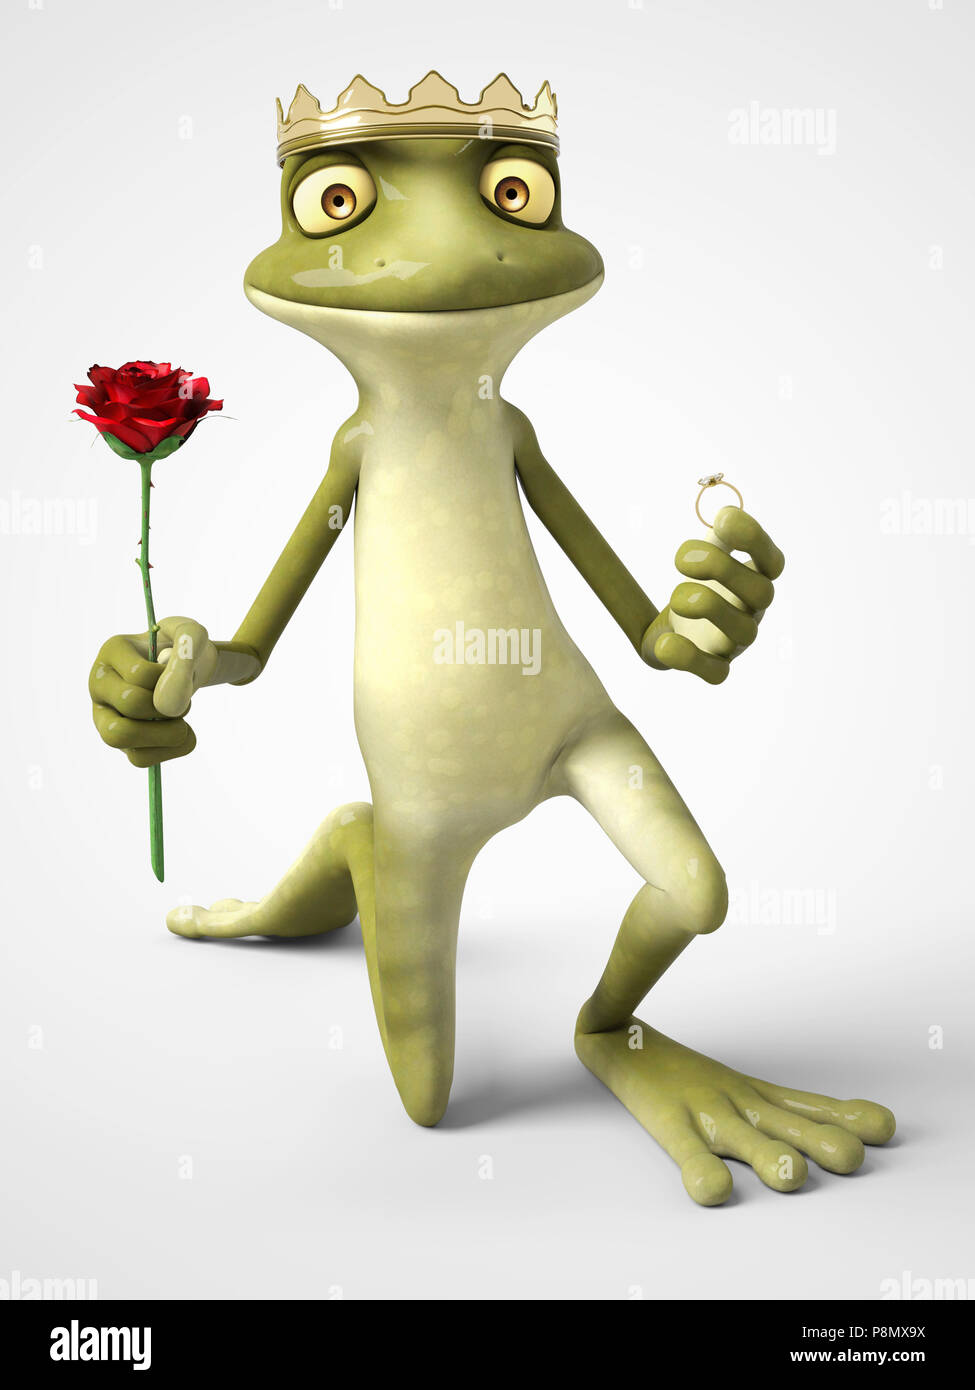 3D rendering of a smiling, romantic cartoon frog prince holding a red rose in one hand and a ring in the other. He is down on one knee to propose. Whi Stock Photo